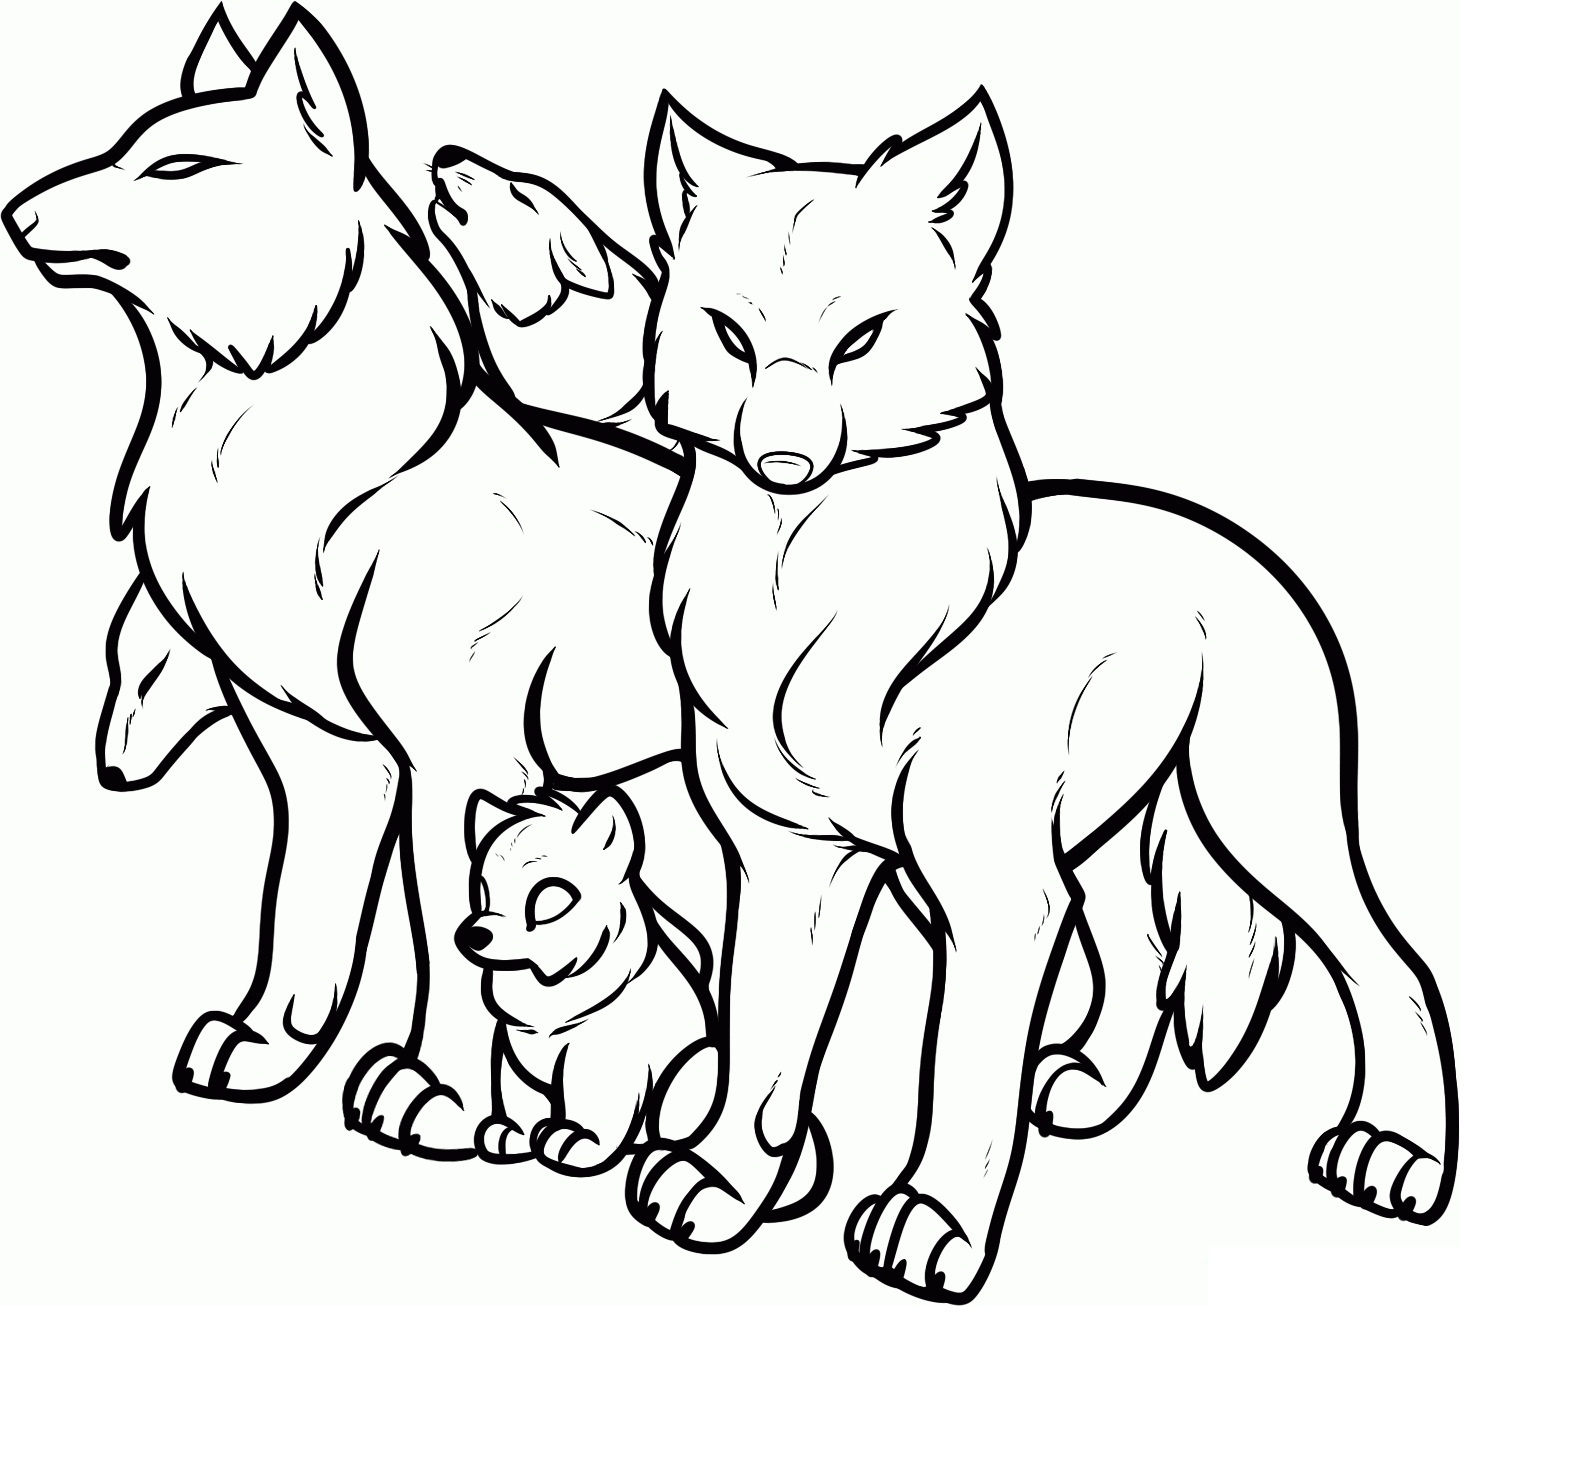 Download The Best Wolf Coloring Pages for Kids - Best Coloring ...